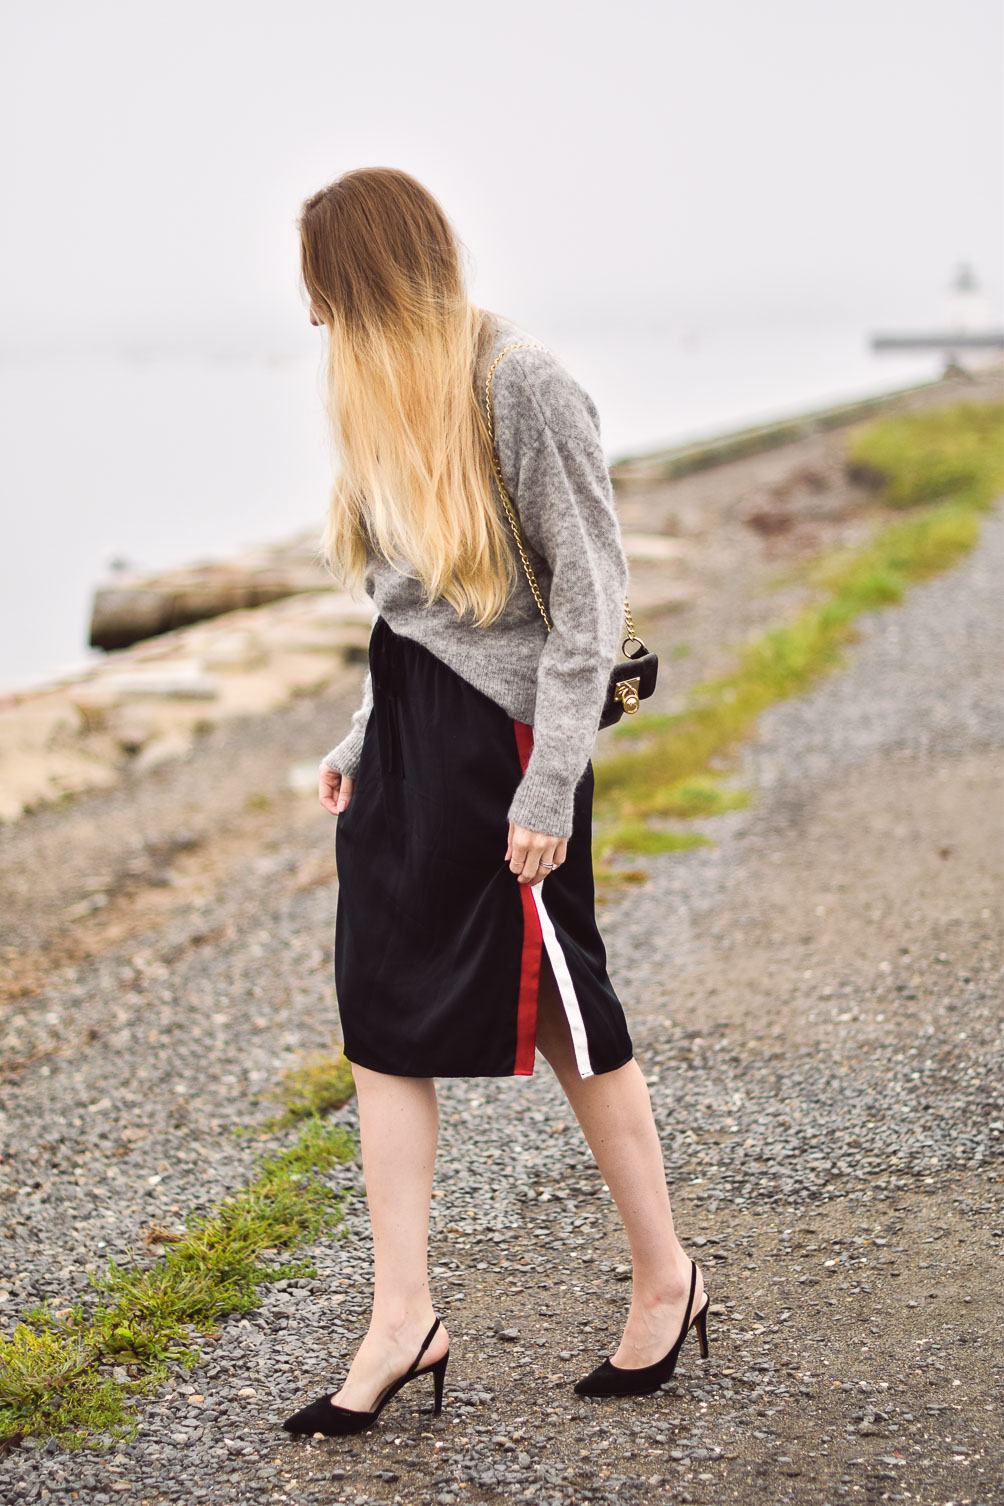 styling a mohair sweater with silky track skirt and black slingback pumps for fall outfit inspiration